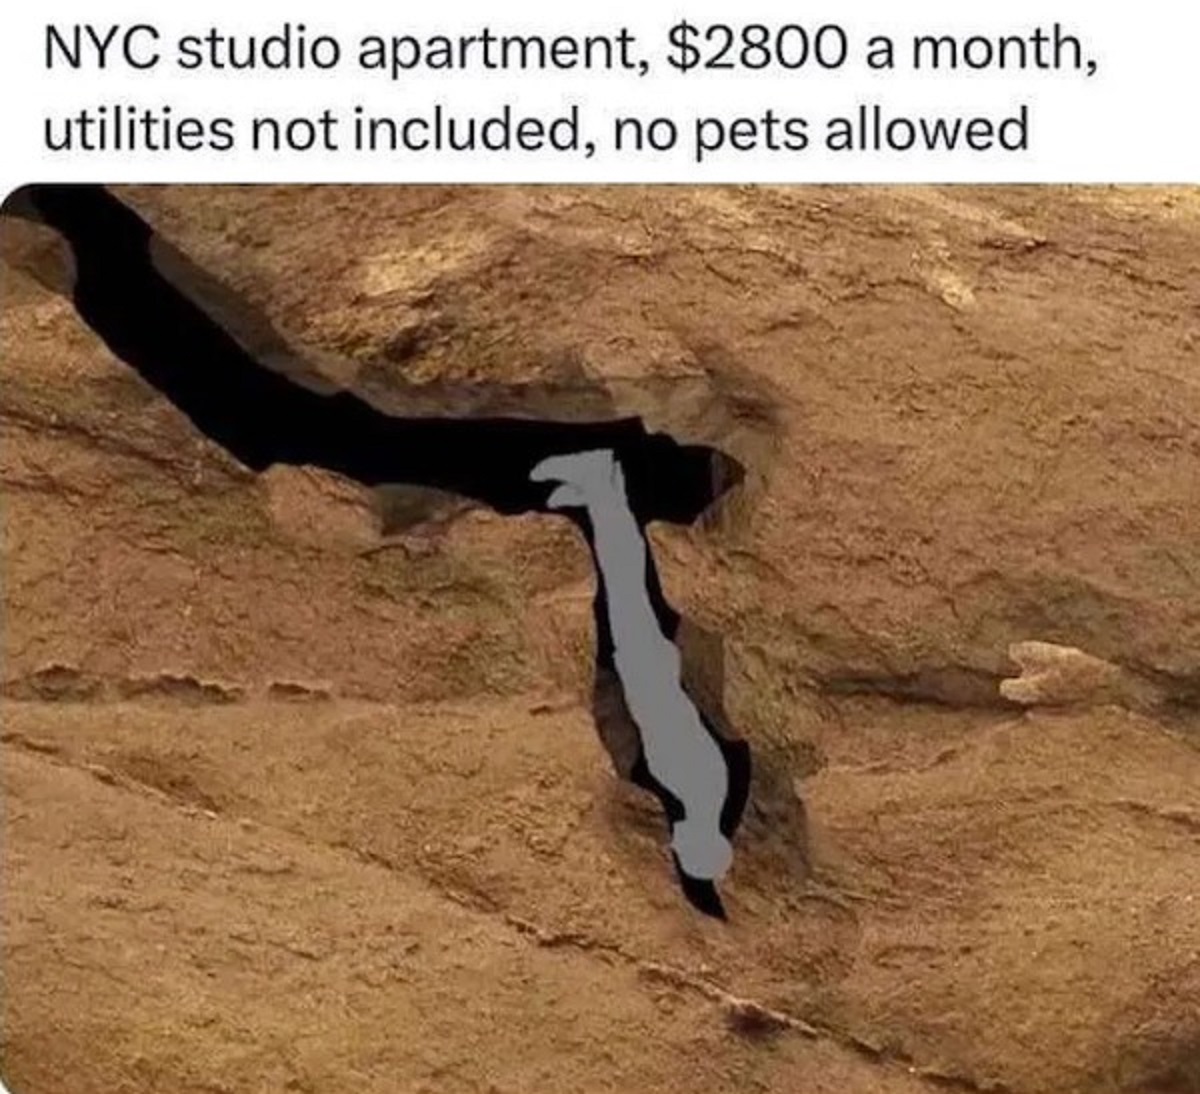 nutty putty cave - Nyc studio apartment, $2800 a month, utilities not included, no pets allowed